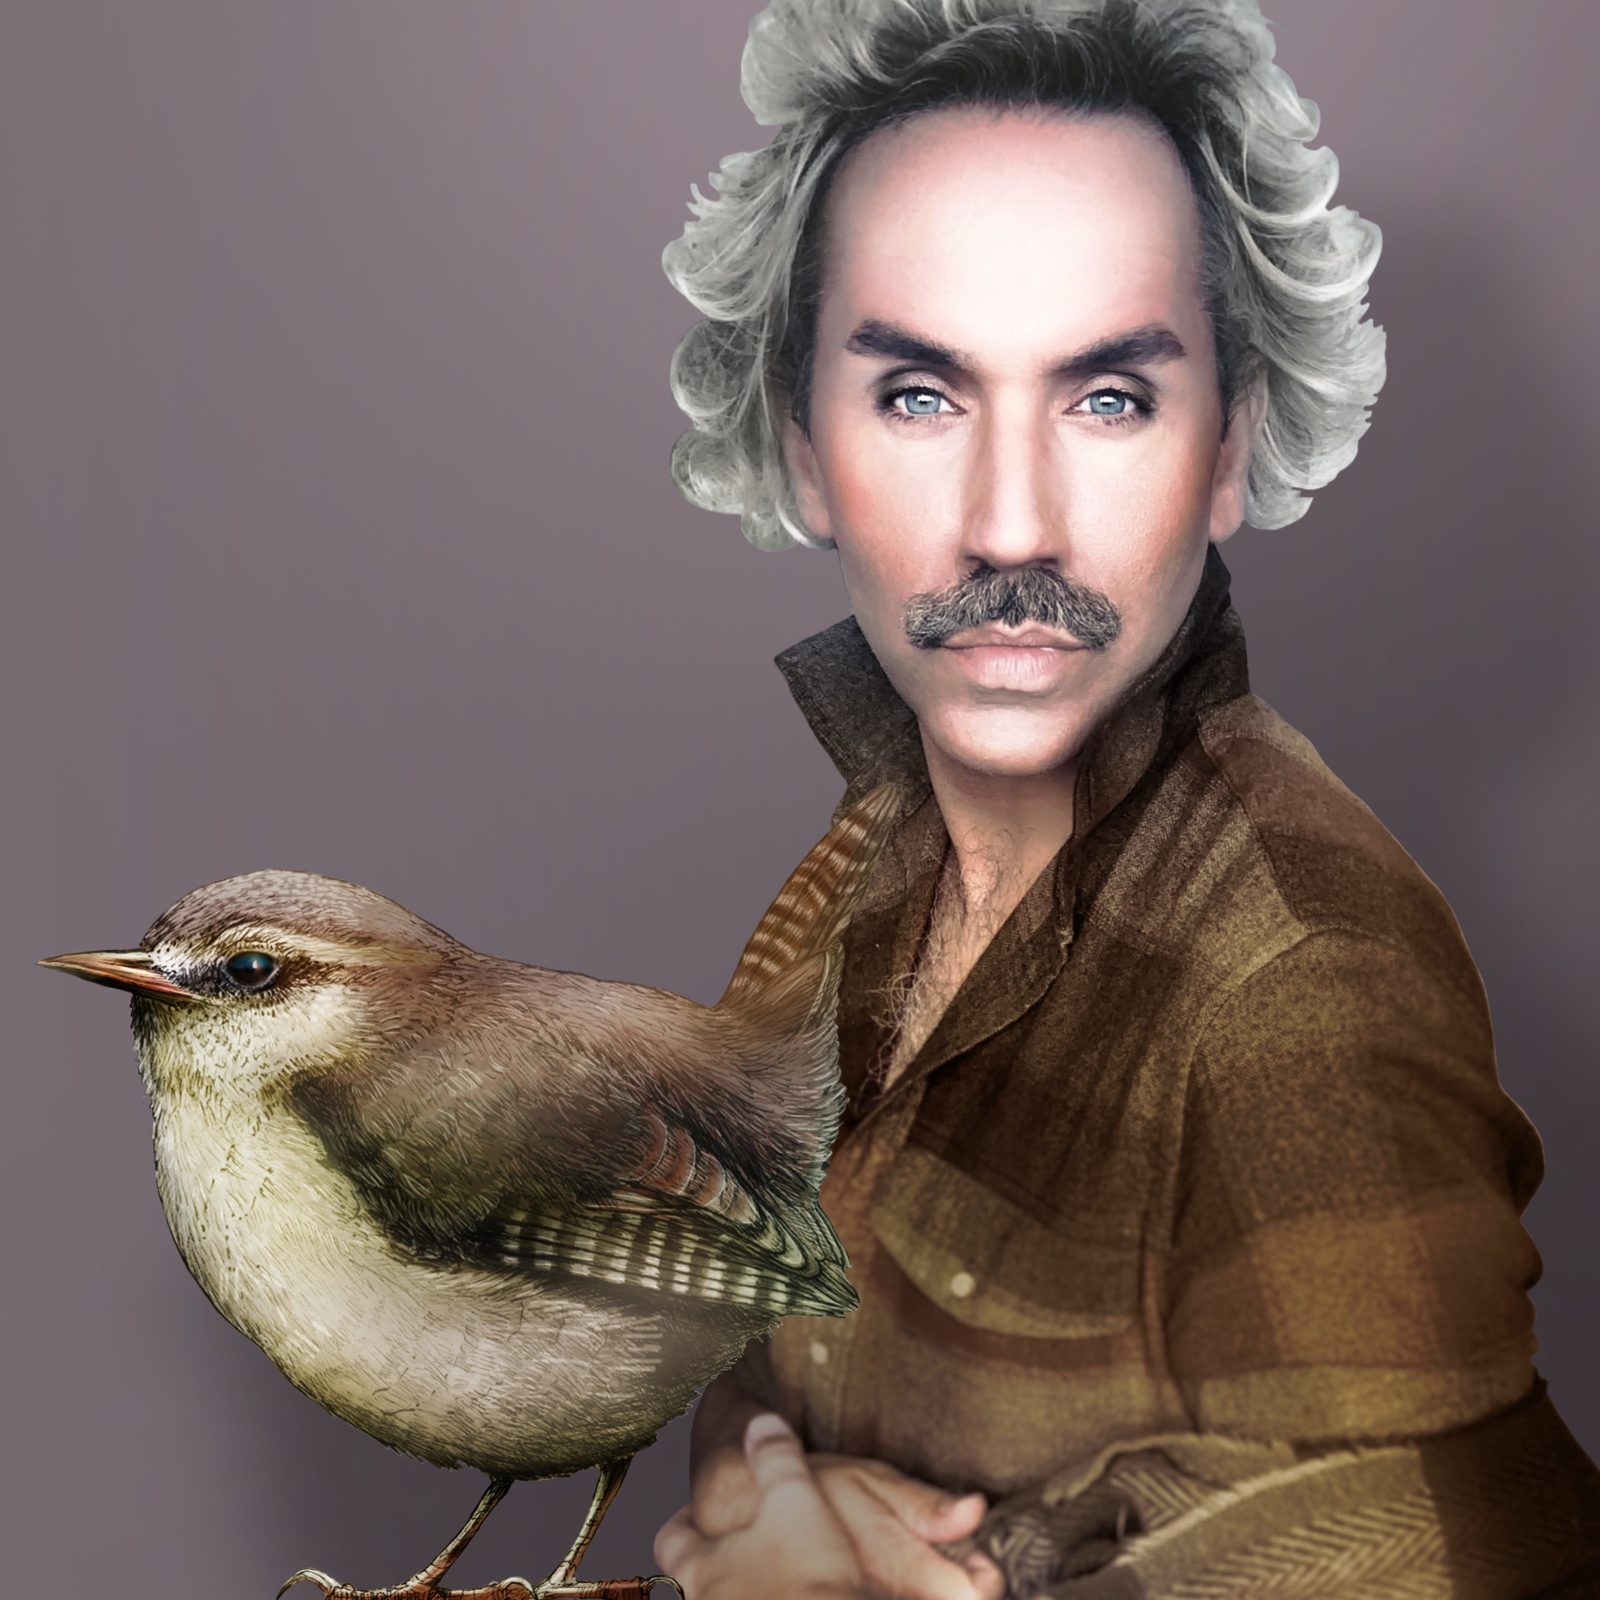 Paul Harfleet is Dressed up as a Wren, he has grey hair and grey smokey eyeshadow, and is wearing a brown checkered shirt. In front of him is a detailed illustration of the bird.